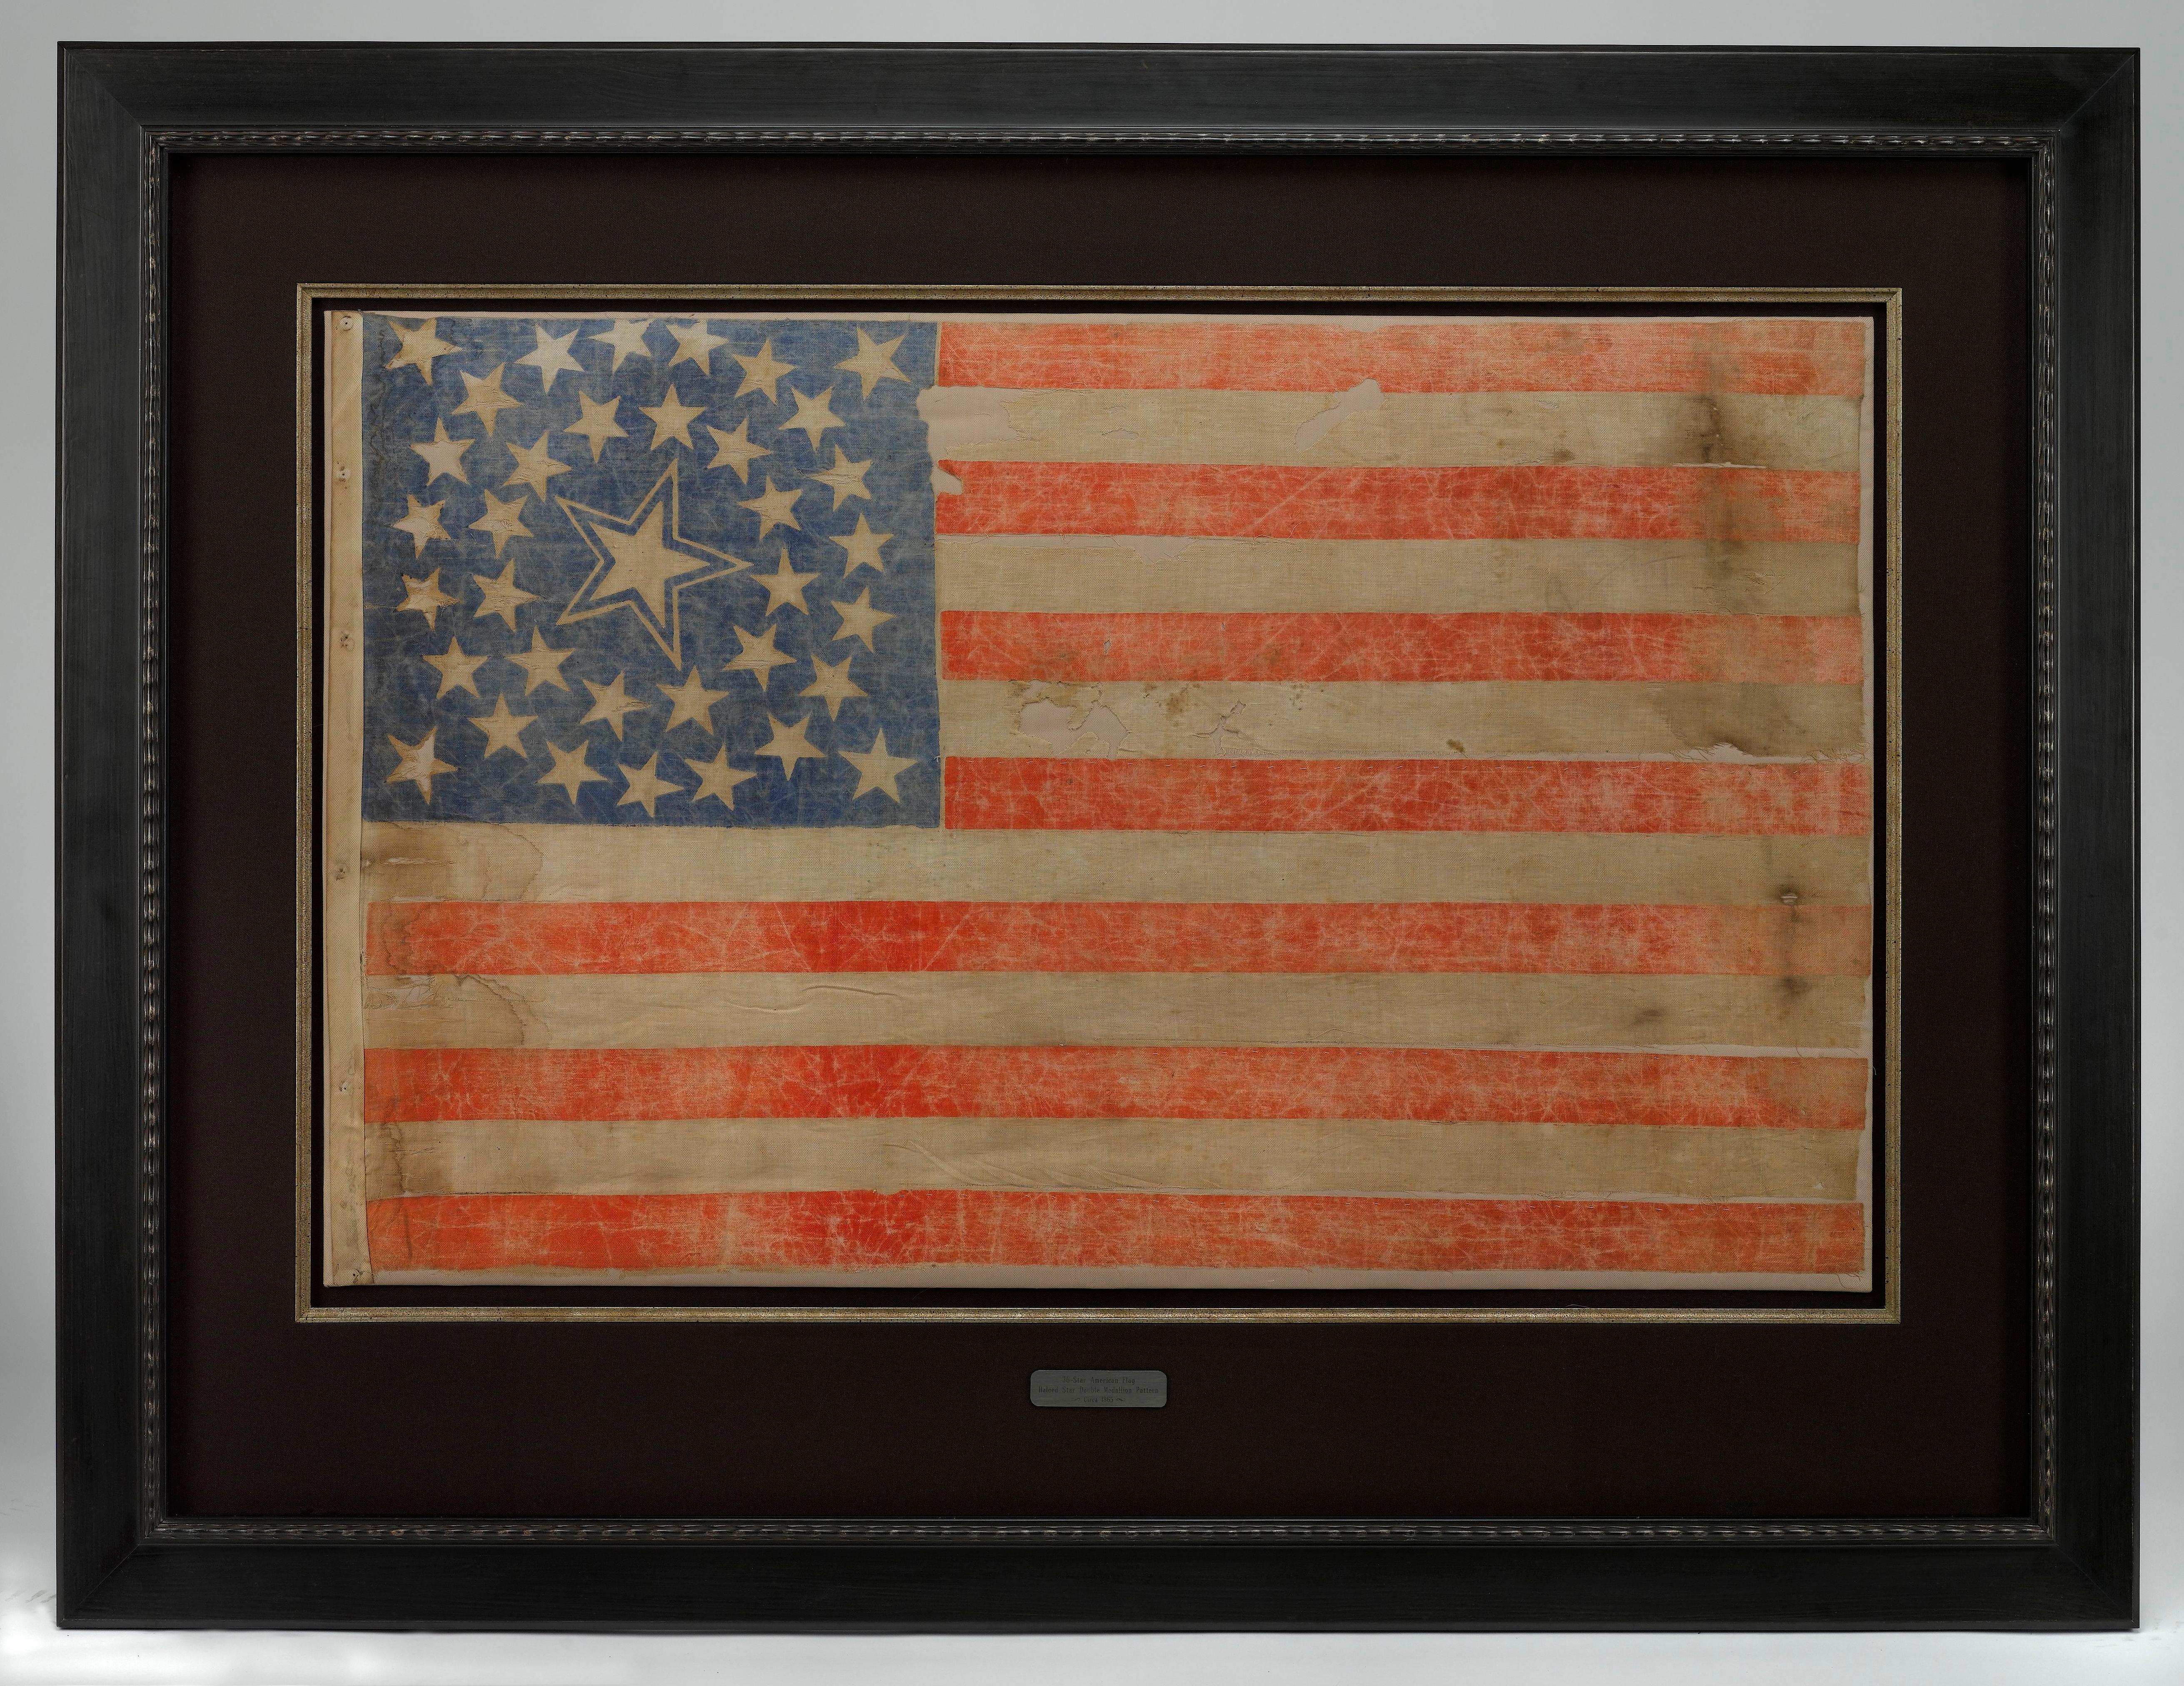 This 36-star flag has stars arranged in a gorgeous and highly desirable medallion pattern.  This particular medallion includes a large haloed star in the middle, two rings of stars surrounding the large star, and a flanking star in each corner